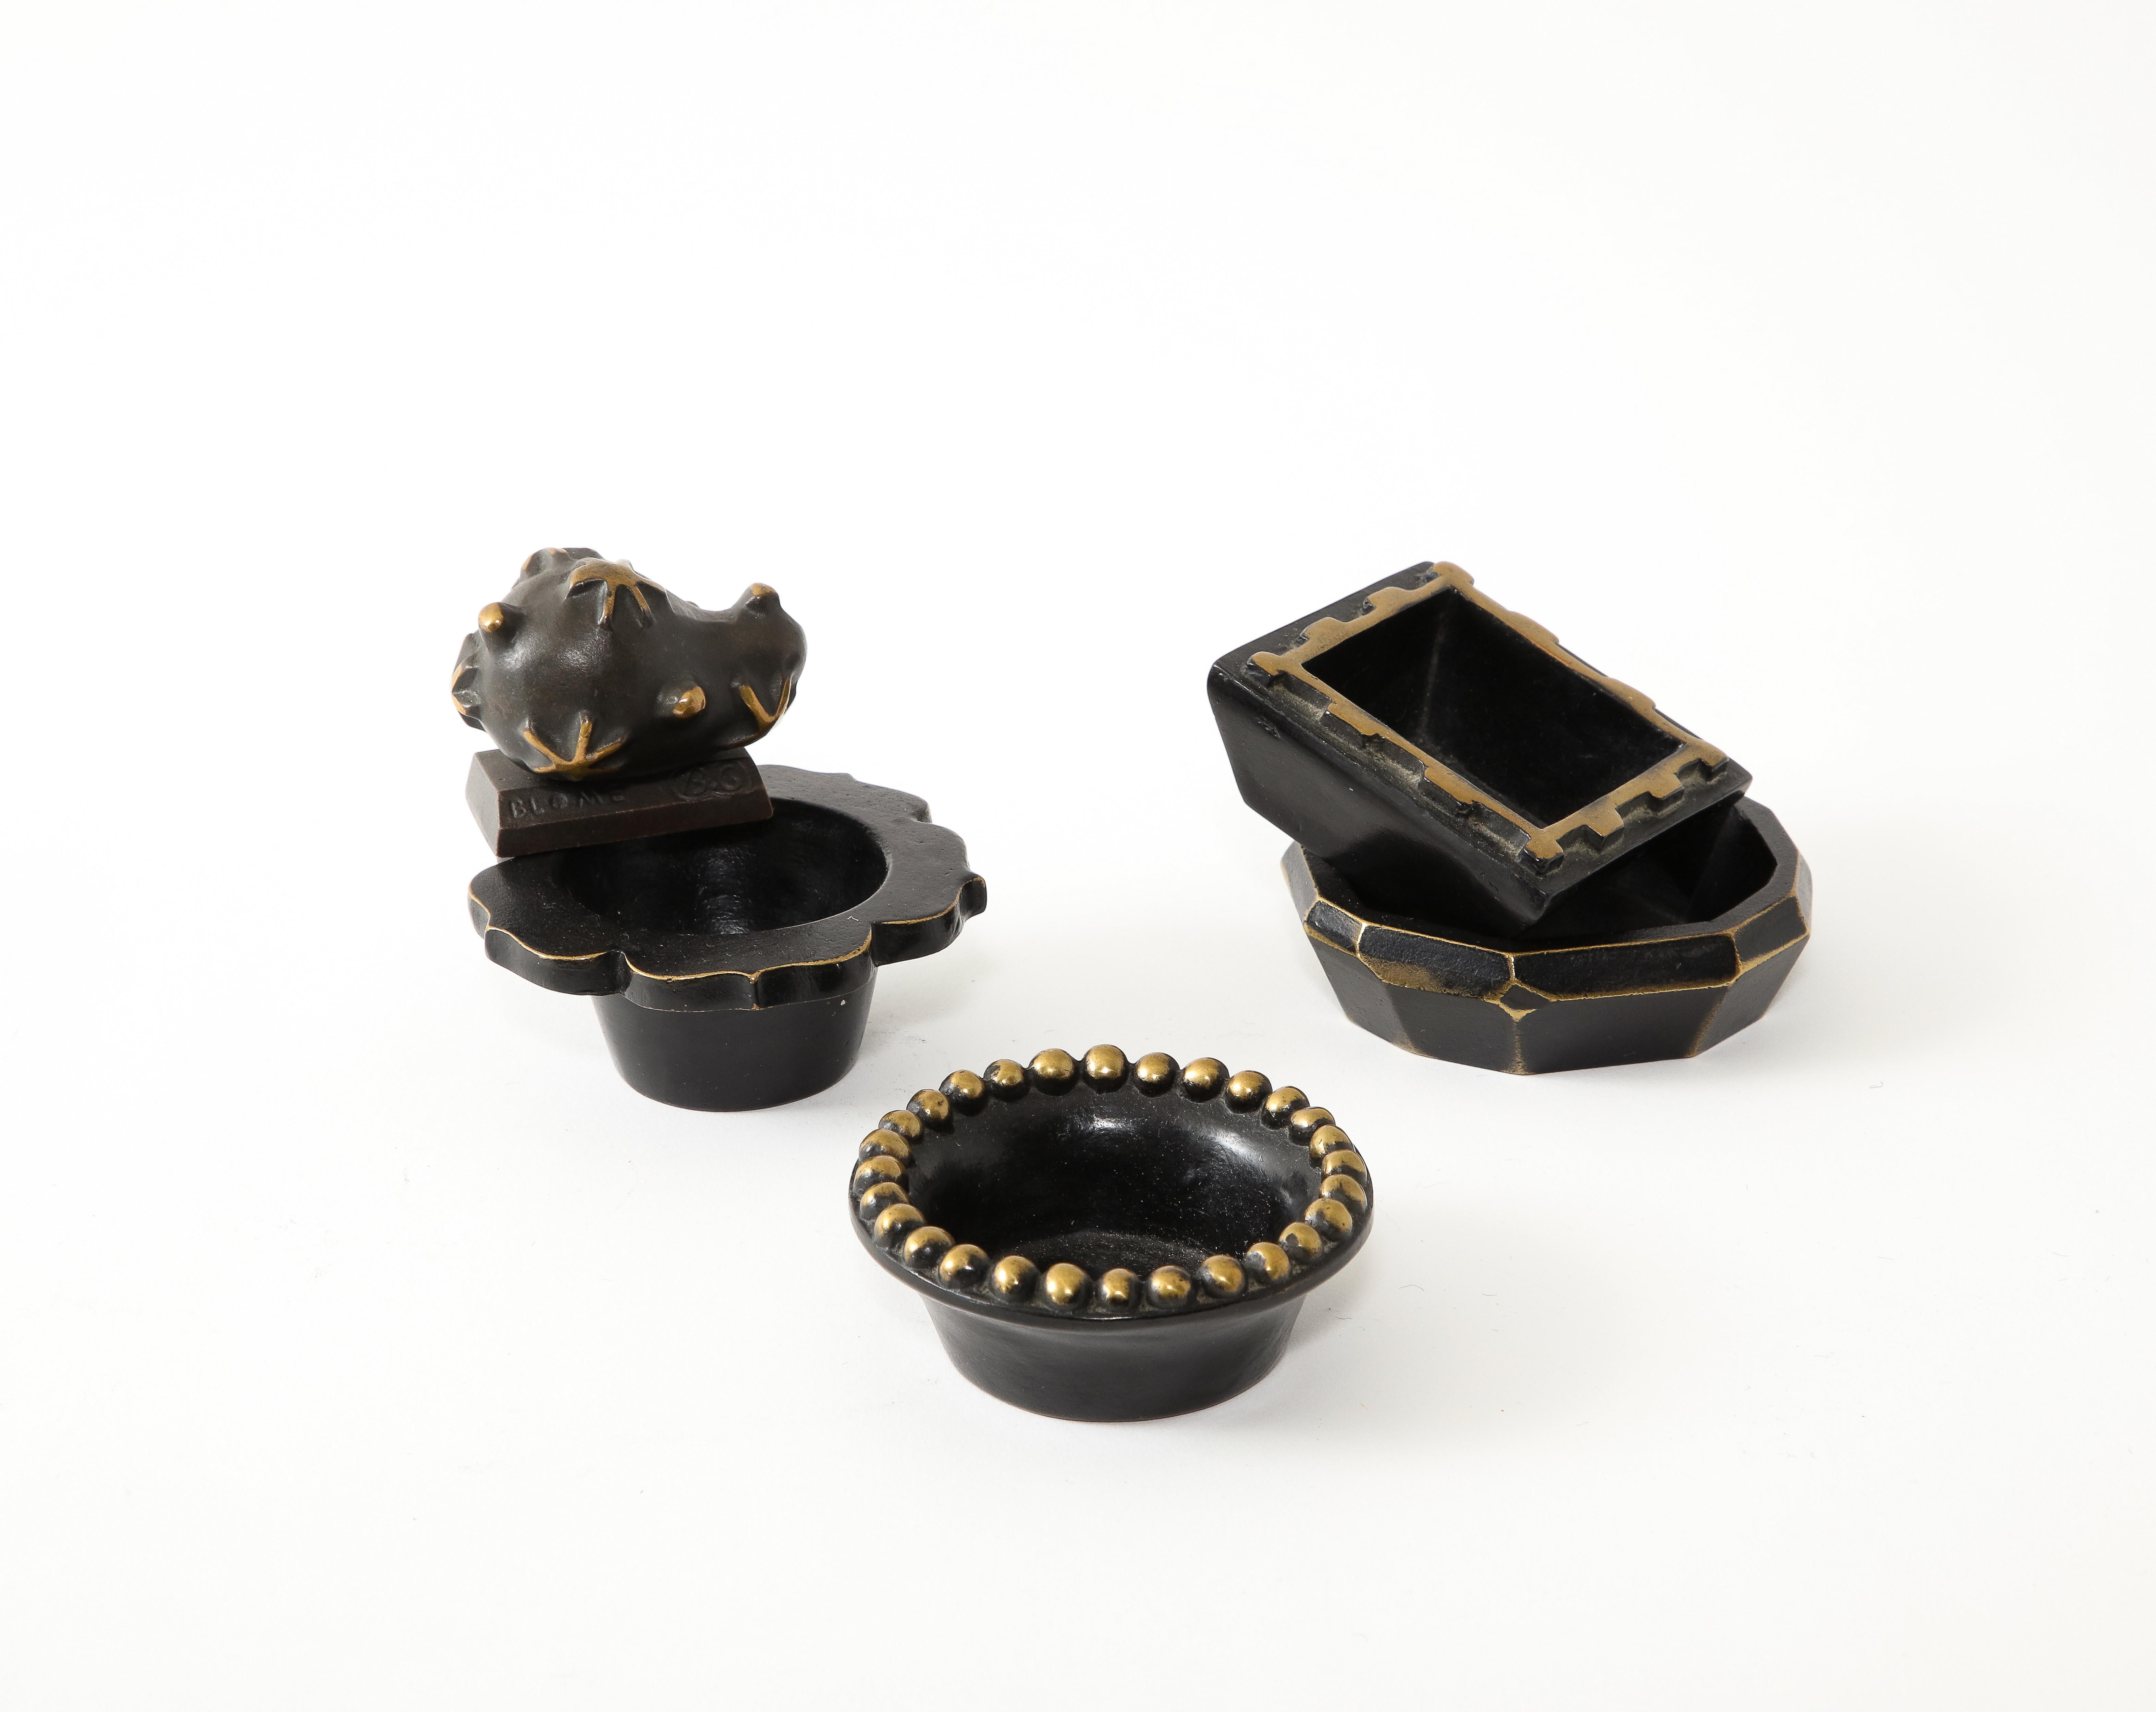 Cast bronze set of objects designed in the 1990s by
French artists Elisabeth Garouste et Mattia
Bonetti for Herbert Blome signed B.G. BLOME
B.G.H. EDITIONS/BLOME.
A set was sold by Wright20 auctions for $7500.
size is 3x3x1 on average.